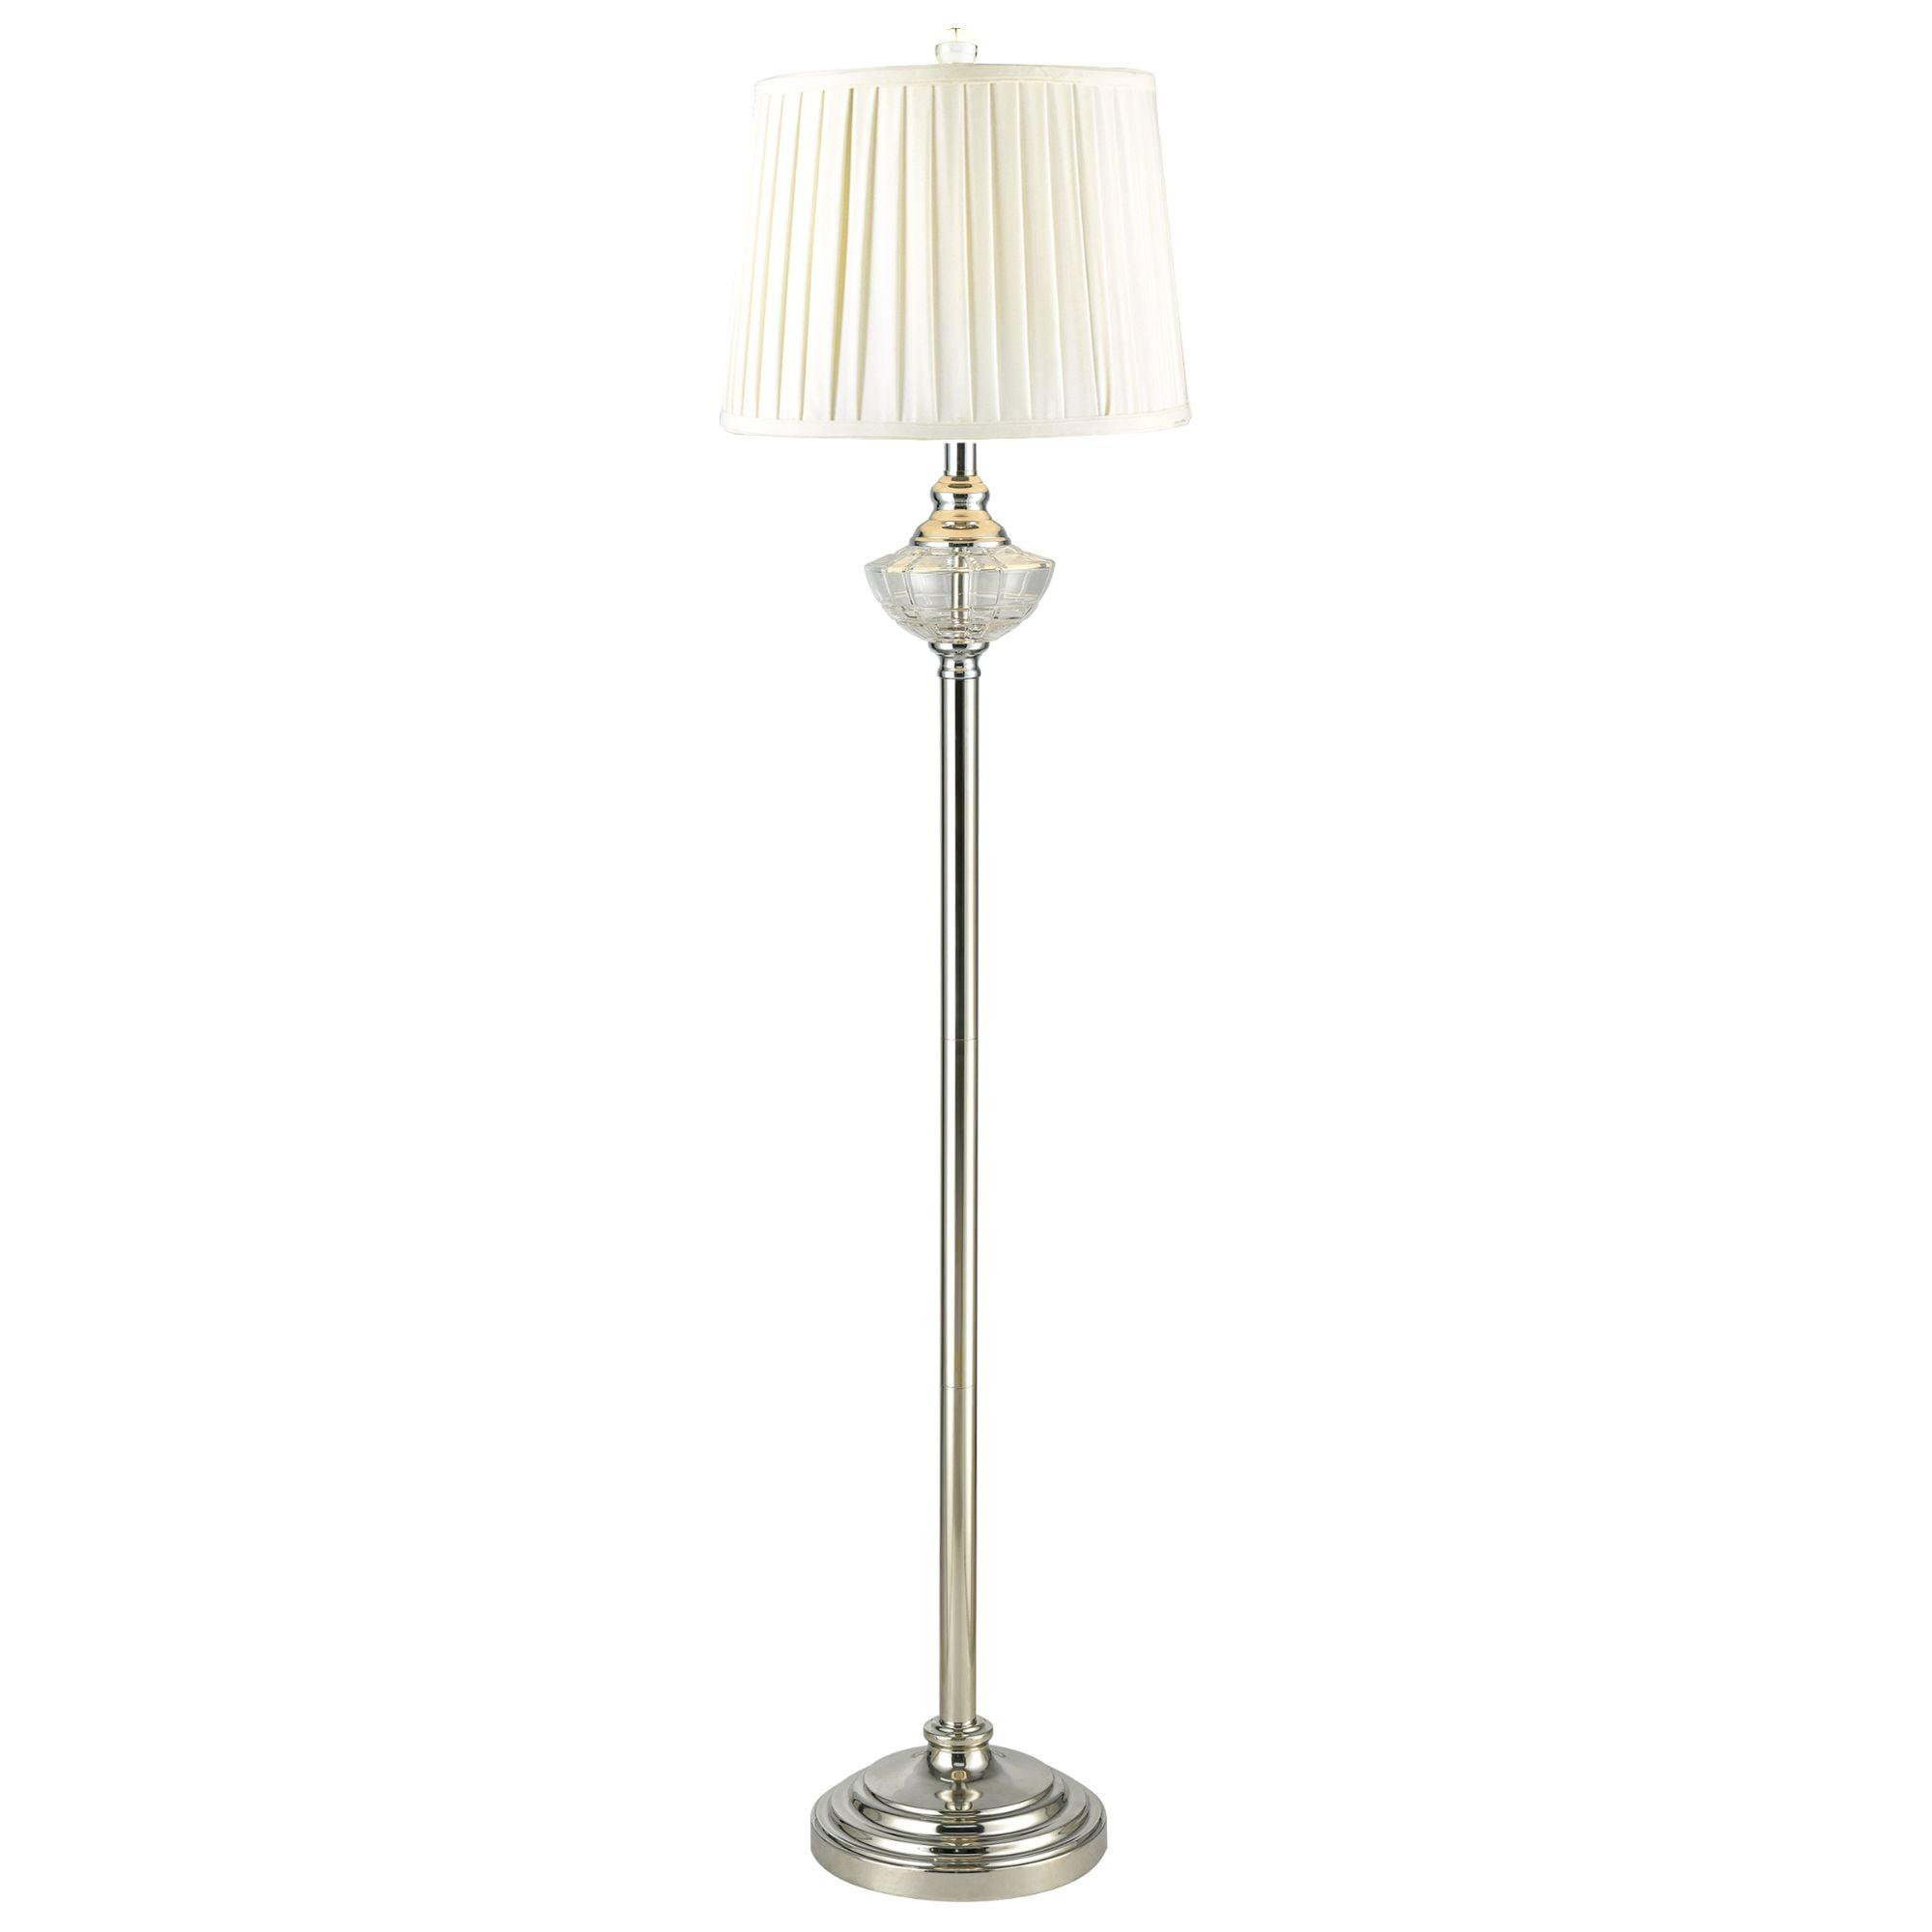 Contemporary Leyla 58" Silver Lead Crystal Floor Lamp with 3-Way Switch